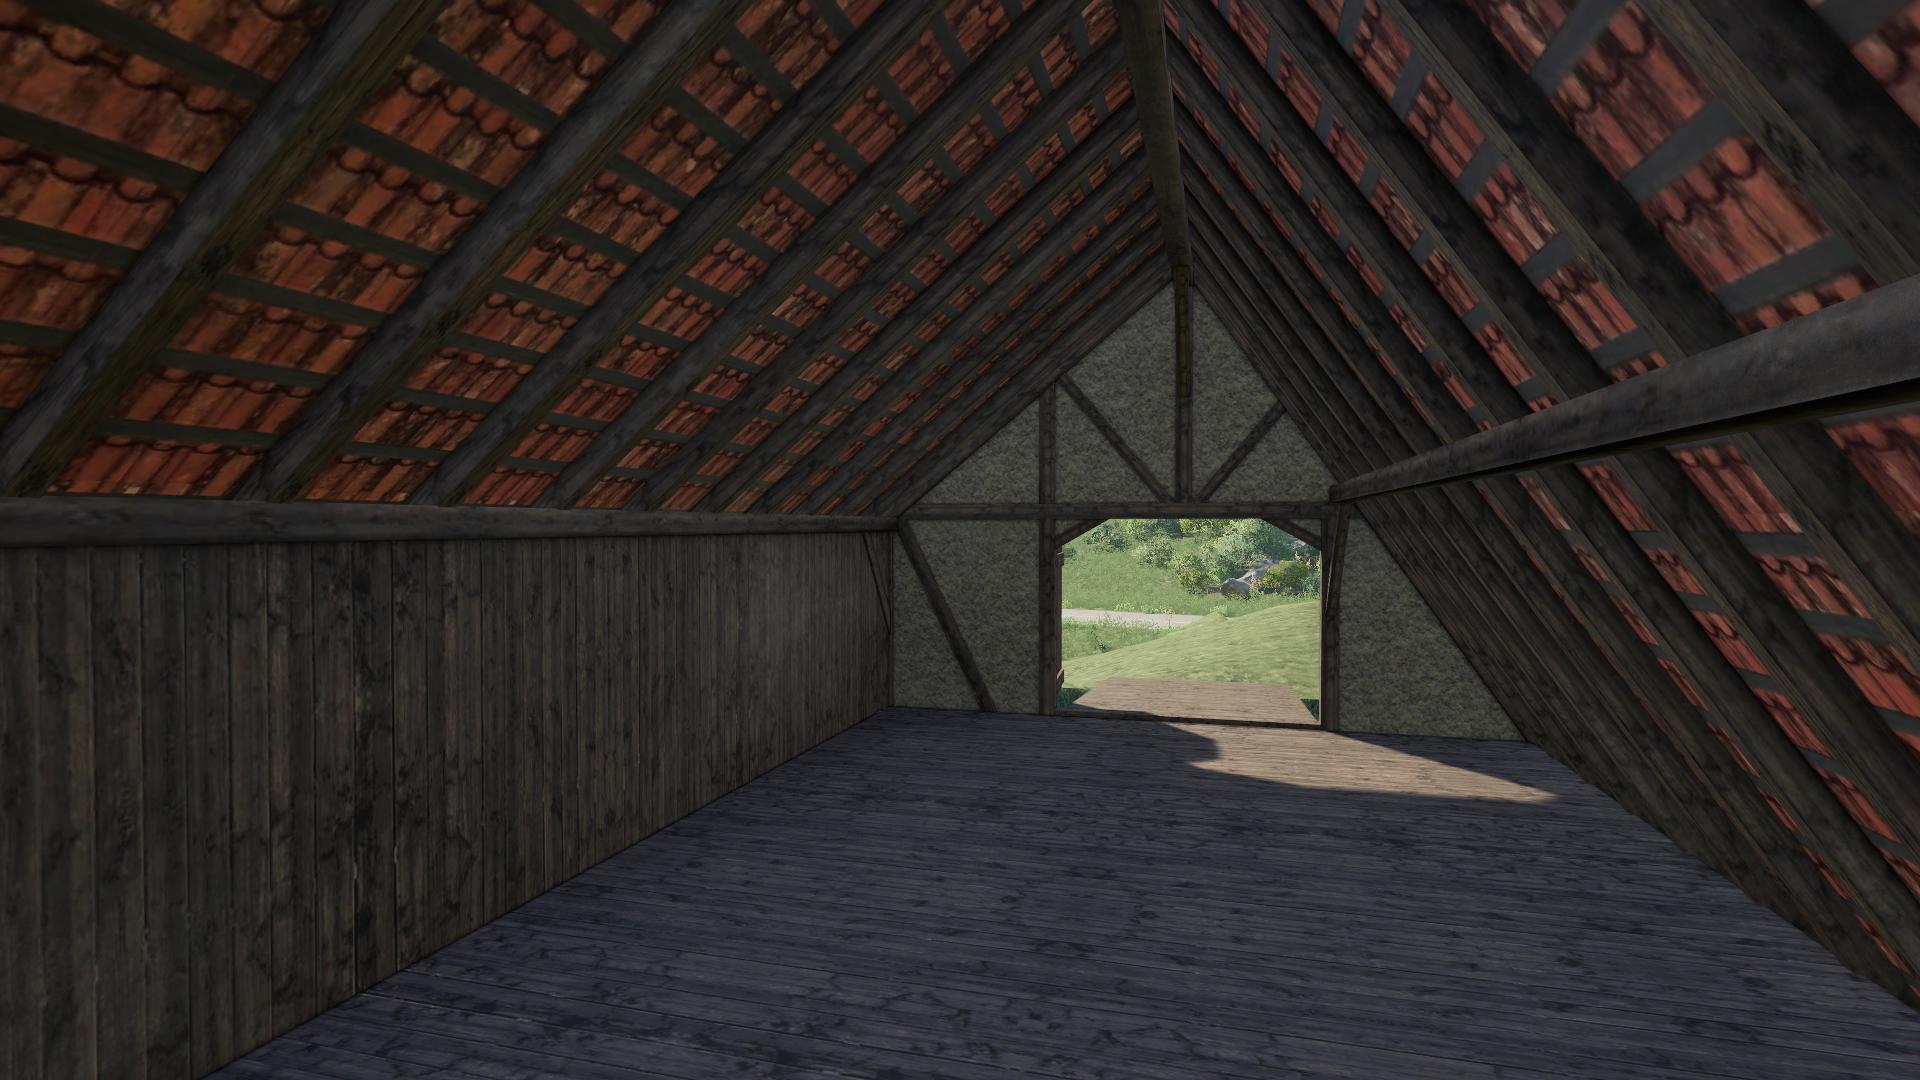 Placeable half-timbered barn v 1.0